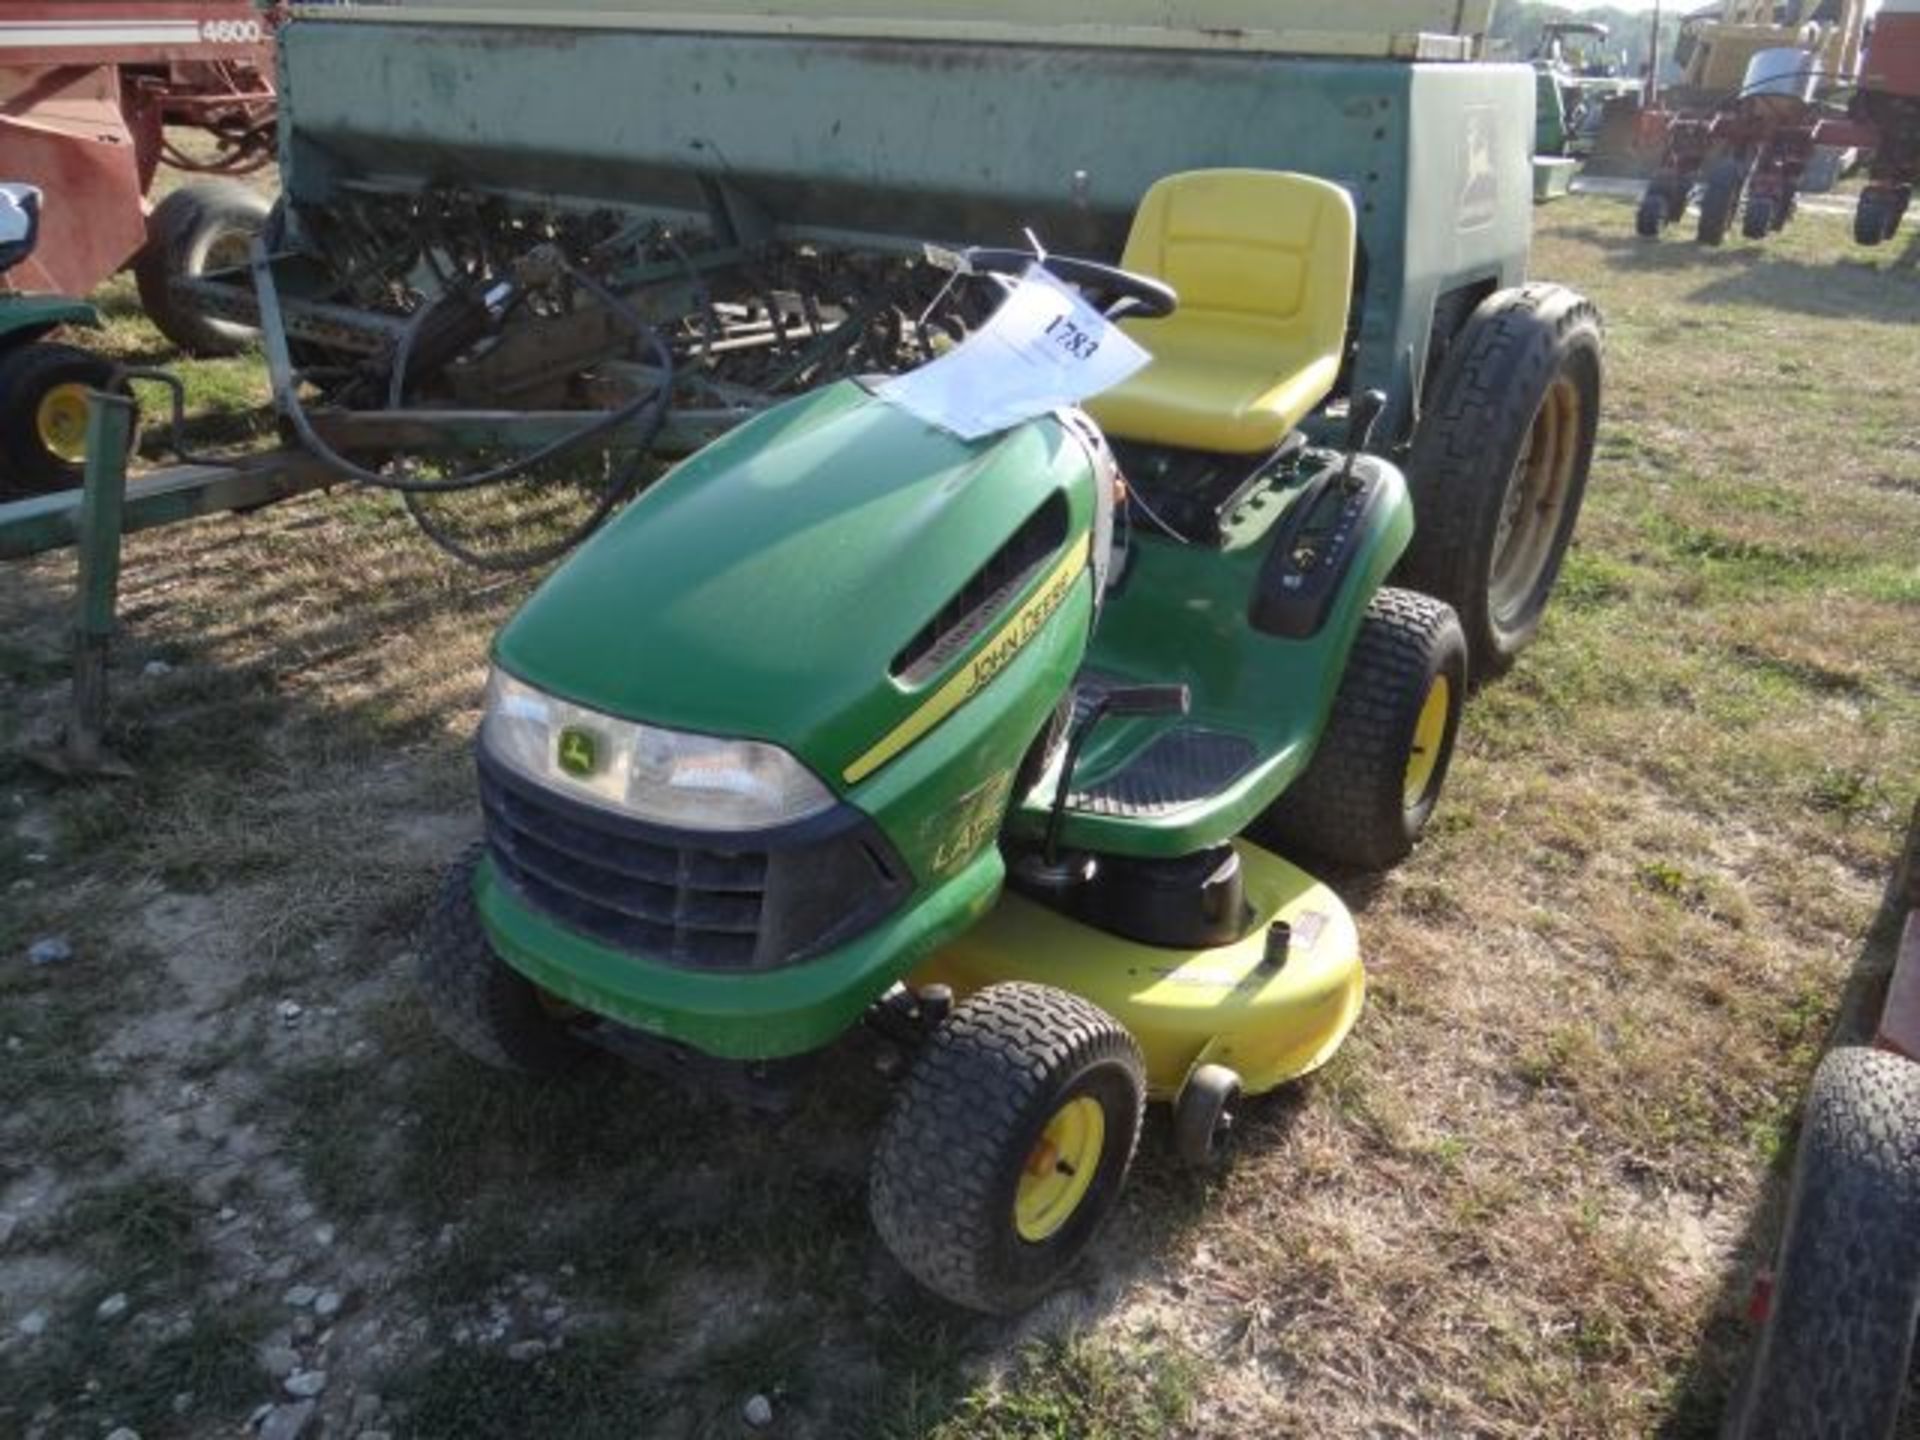 JD LA125 Riding Mower 30" Deck, 11hp, Manual in the Shed - Image 2 of 3